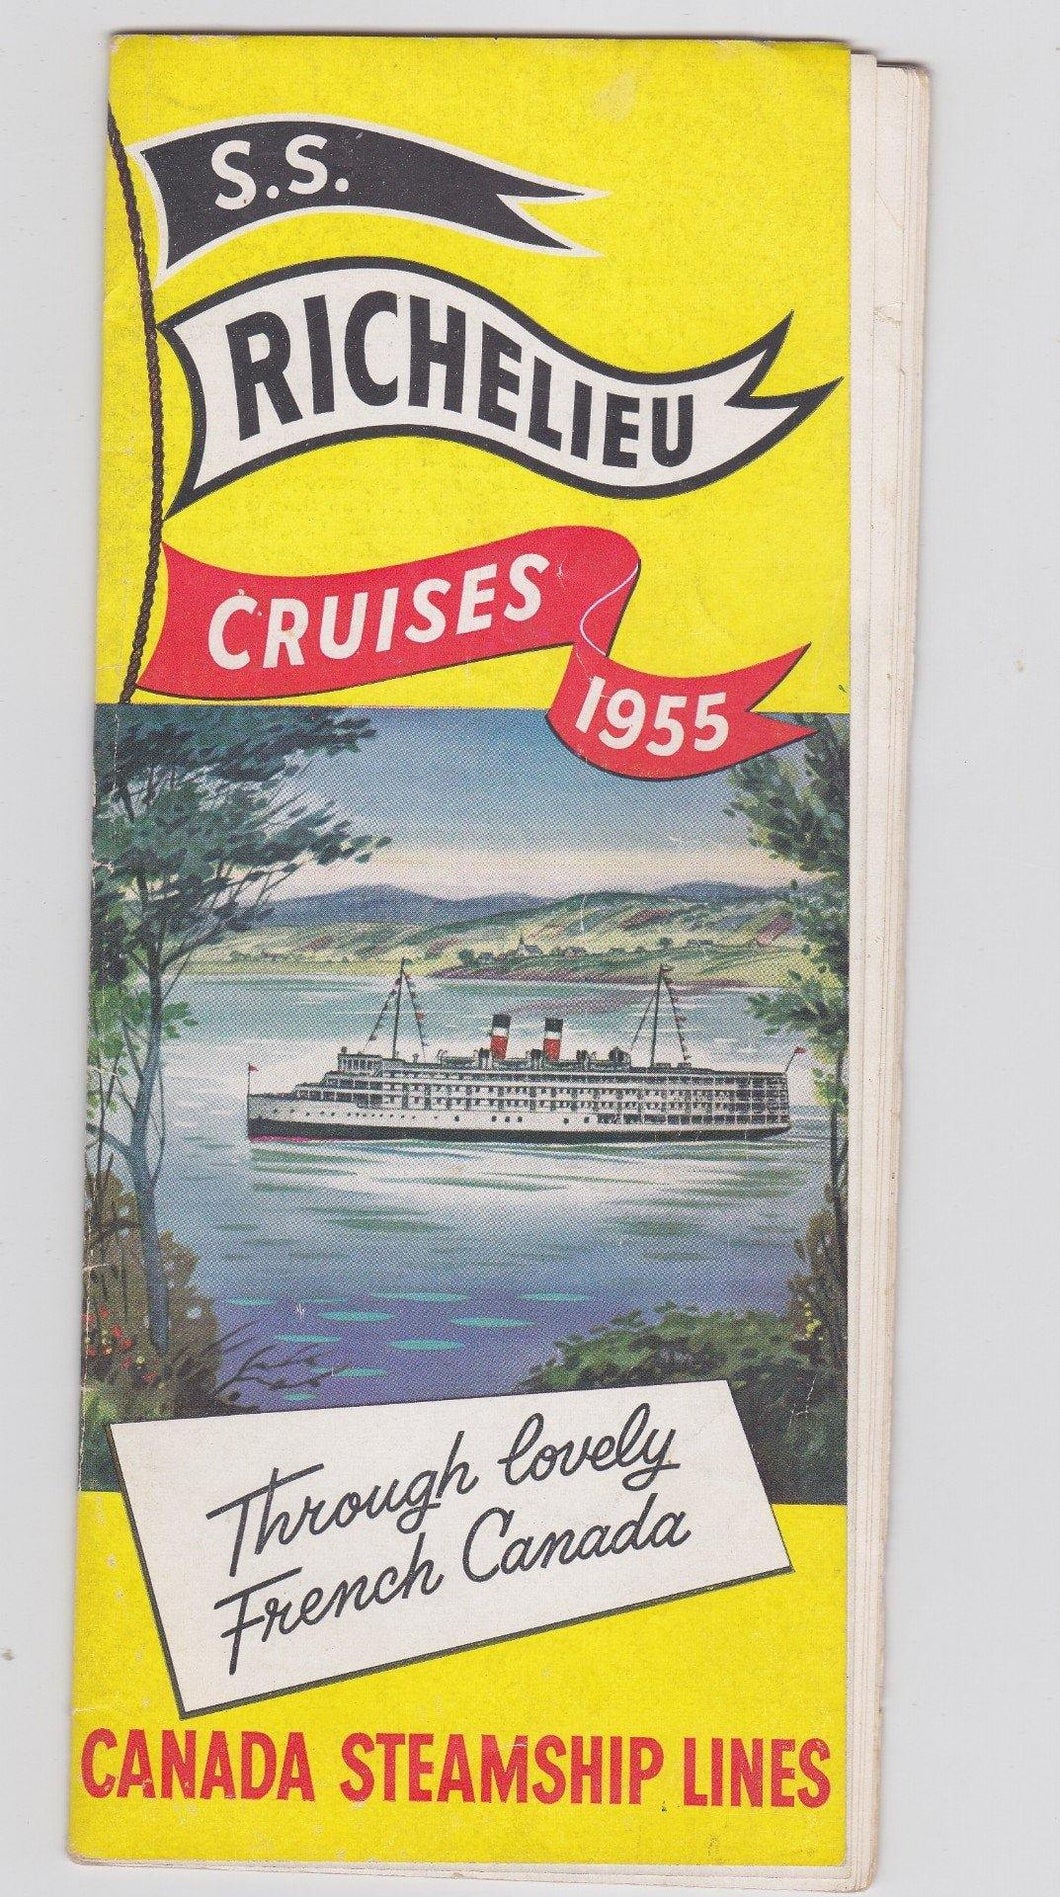 Canada Steamship Lines ss Richelieu 1955 French Canada Cruises Brochure - TulipStuff